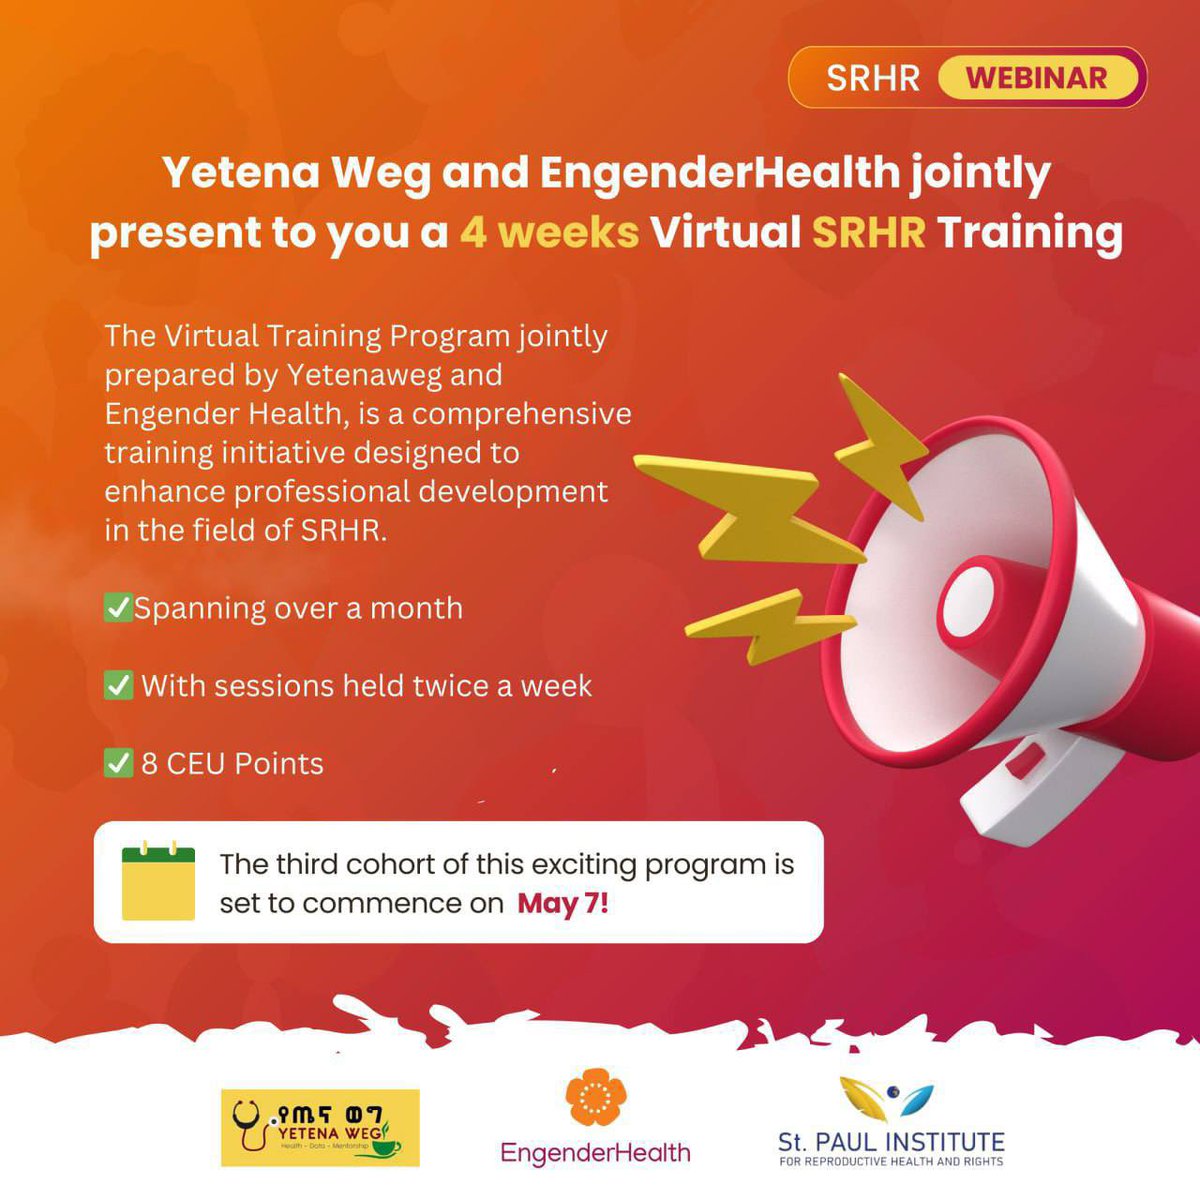 Have you been eagerly waiting for the chance to join our SRHR virtual training? Your wait is over! Another round is here, tailor-made for passionate healthcare professionals like you! Join us for an enriching 4-week virtual training journey presented by Yetenaweg and